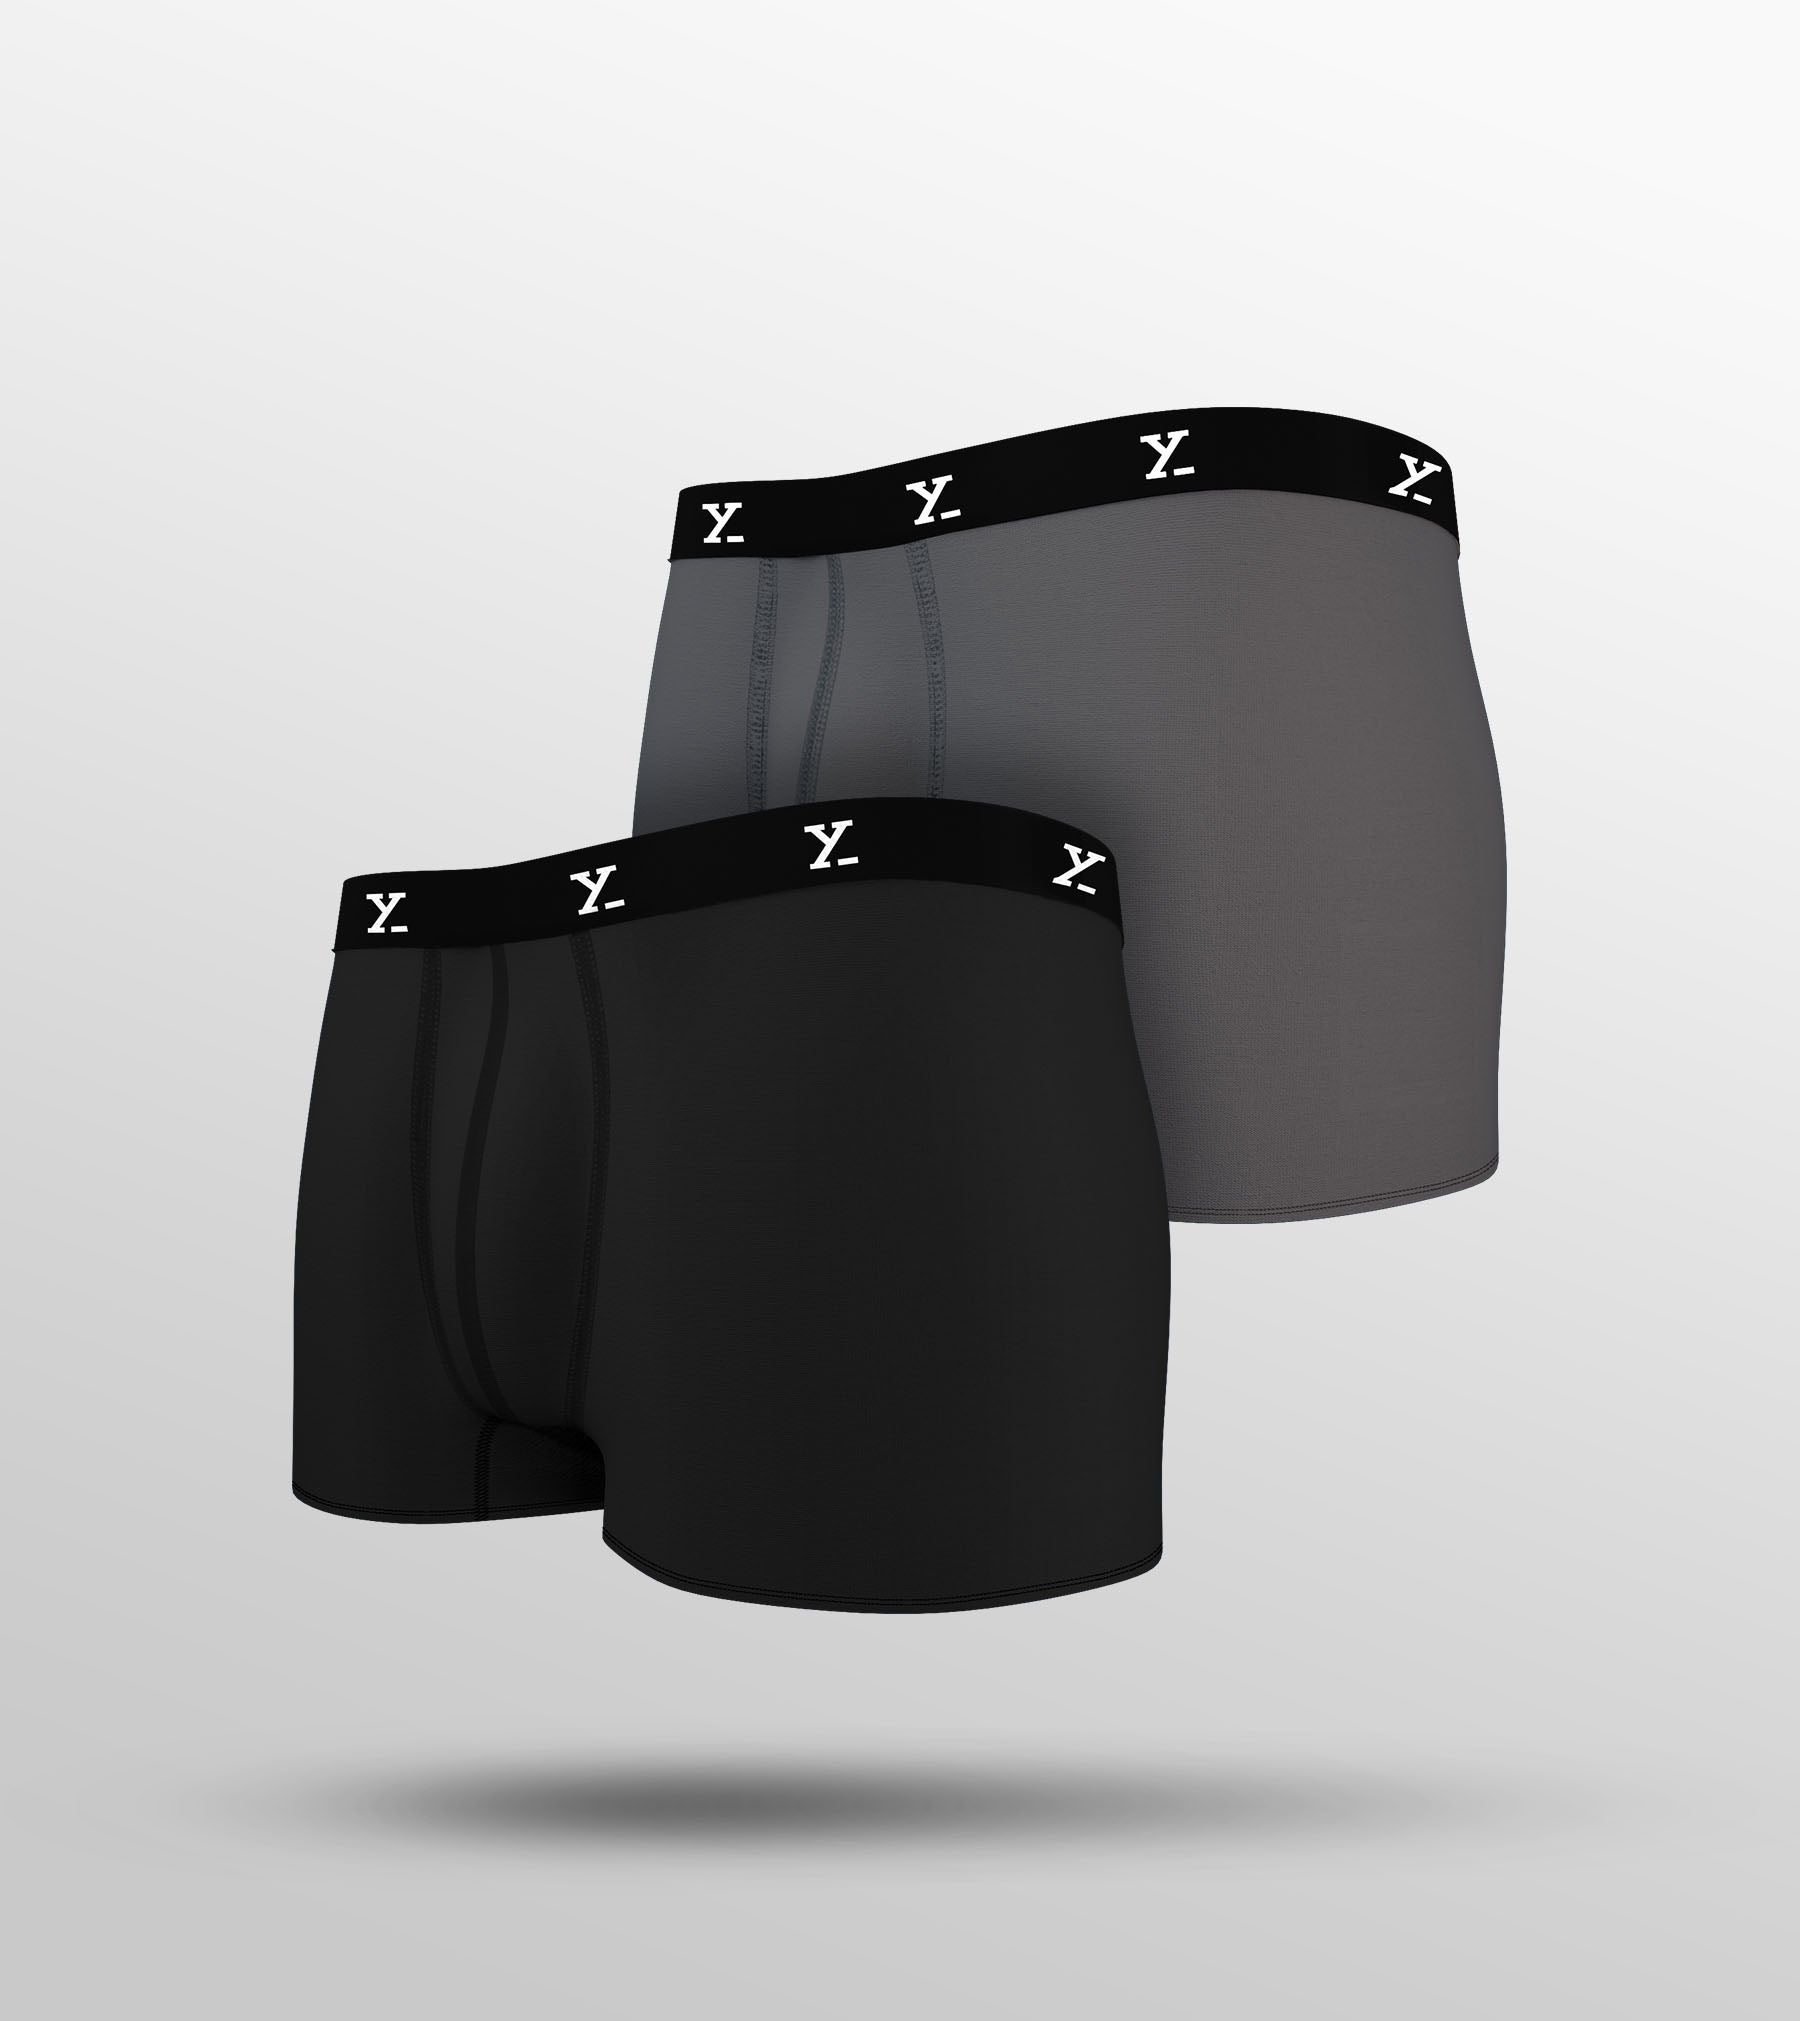 Ace Modal Trunks For Men Pack of 2 (Black, Grey) -  XYXX Mens Apparels